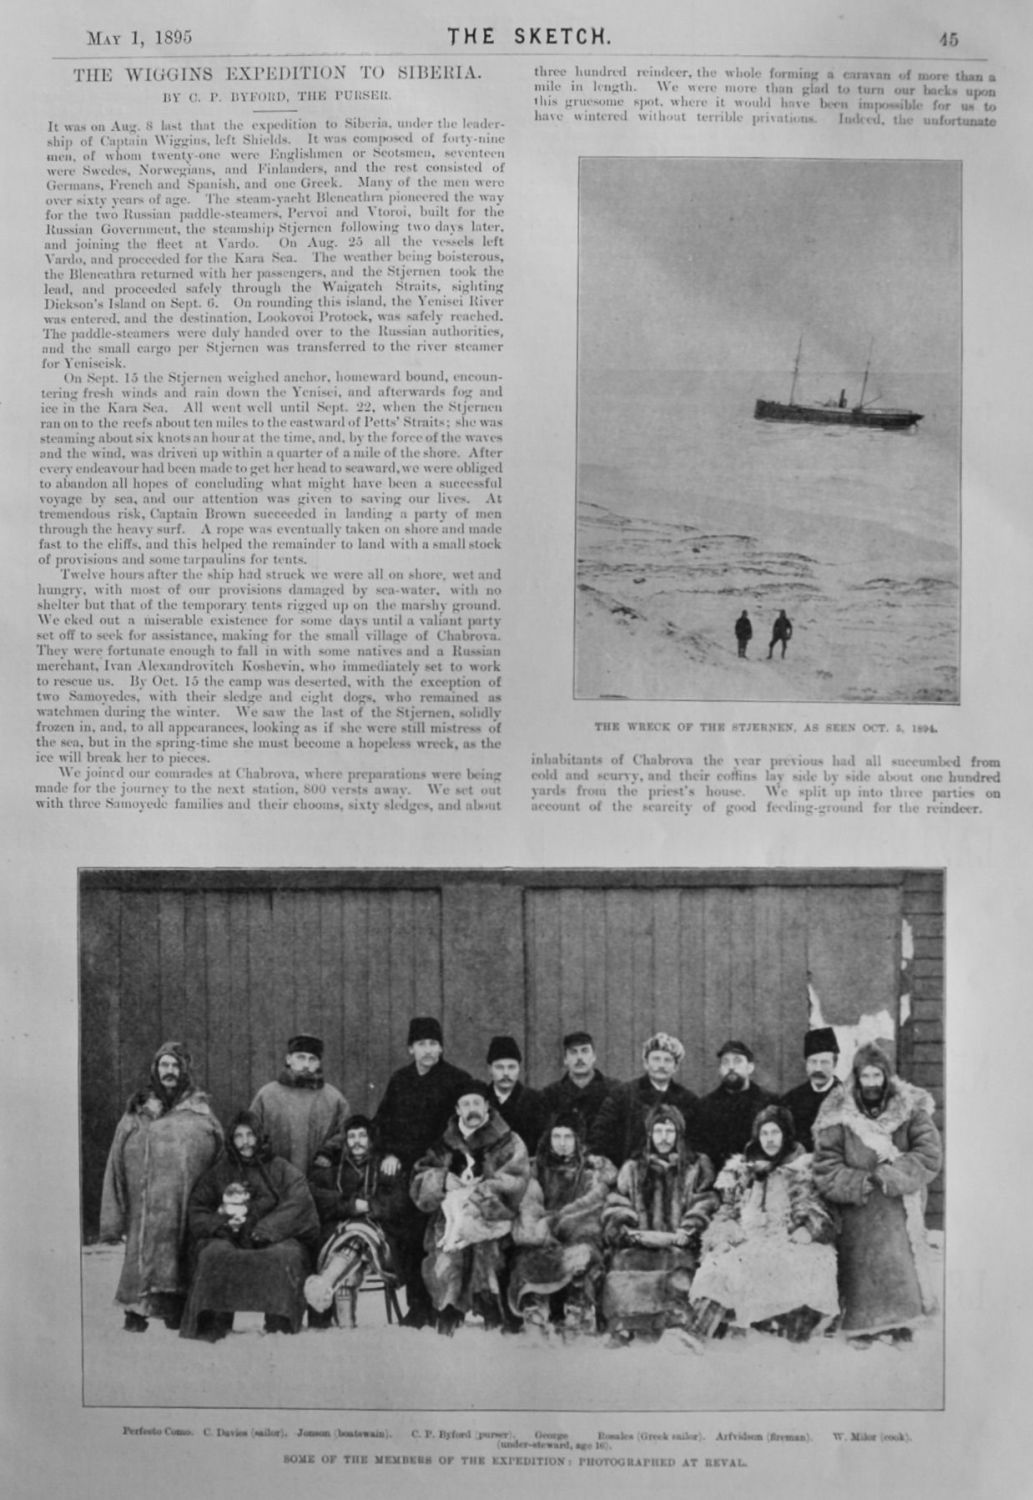 The Wiggins Expedition to Siberia.  1895.